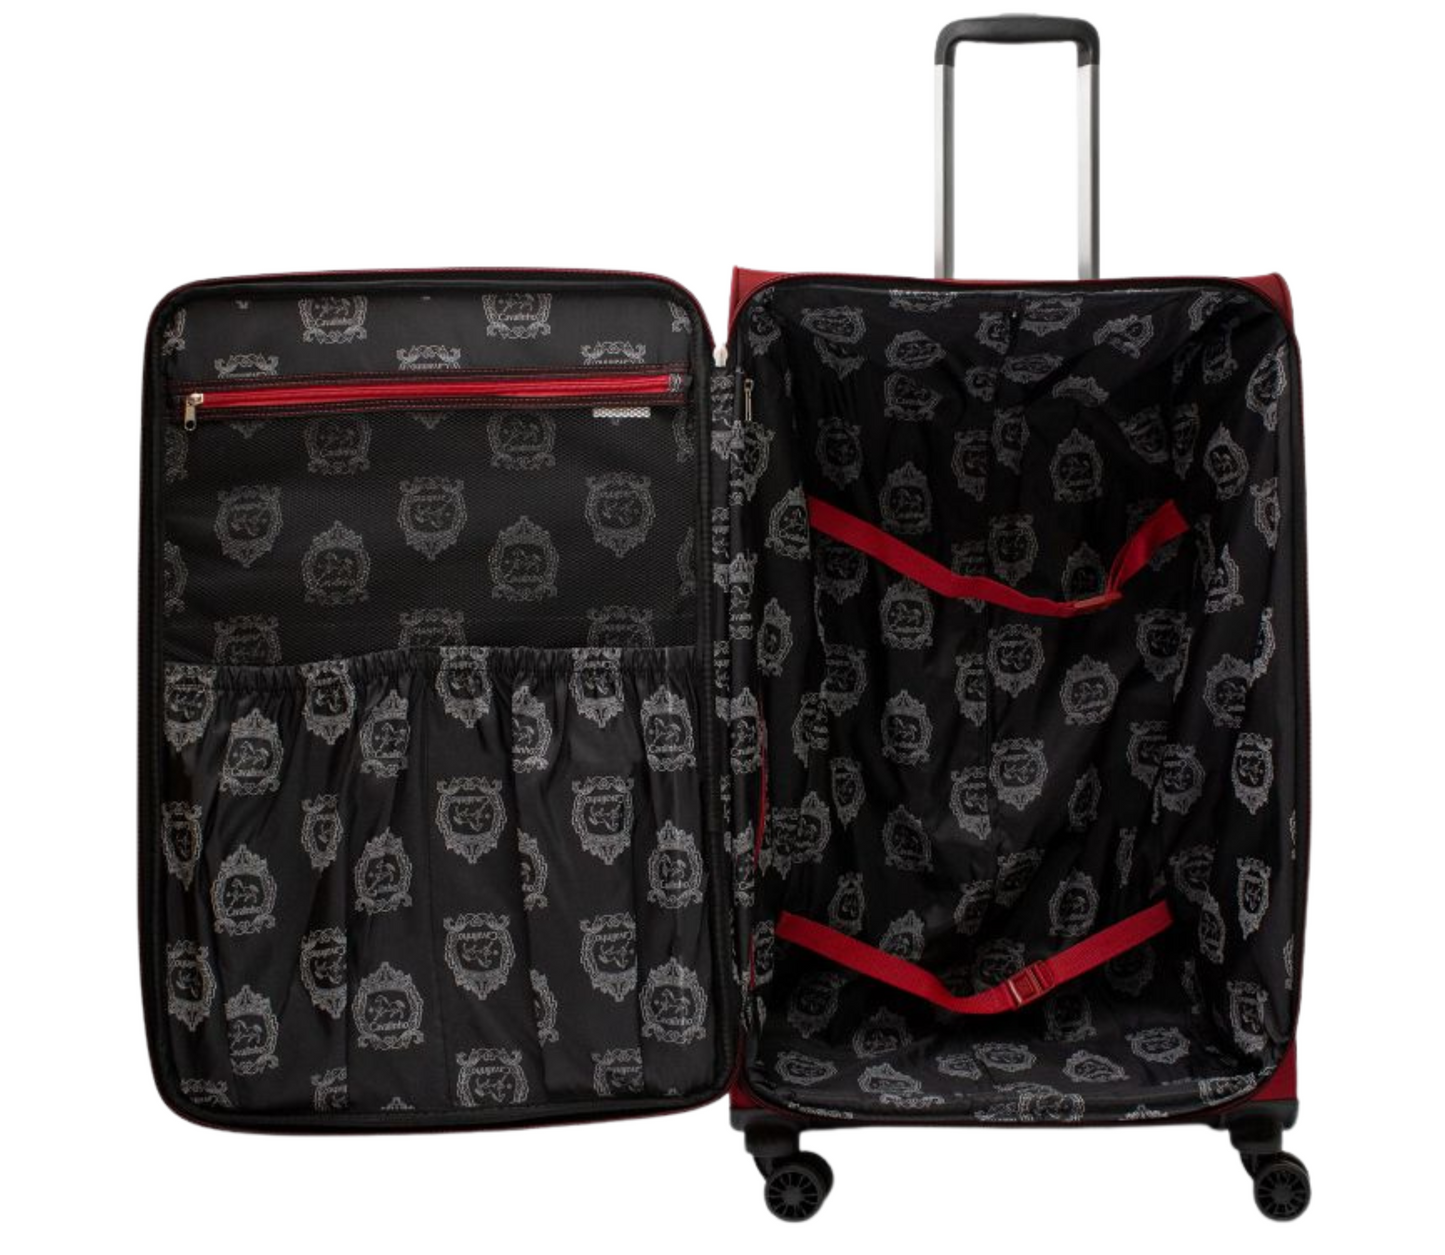 Cavalinho Check-in Softside Luggage (24" or 28") - 28 inch Red - 68020003.04.28_P04